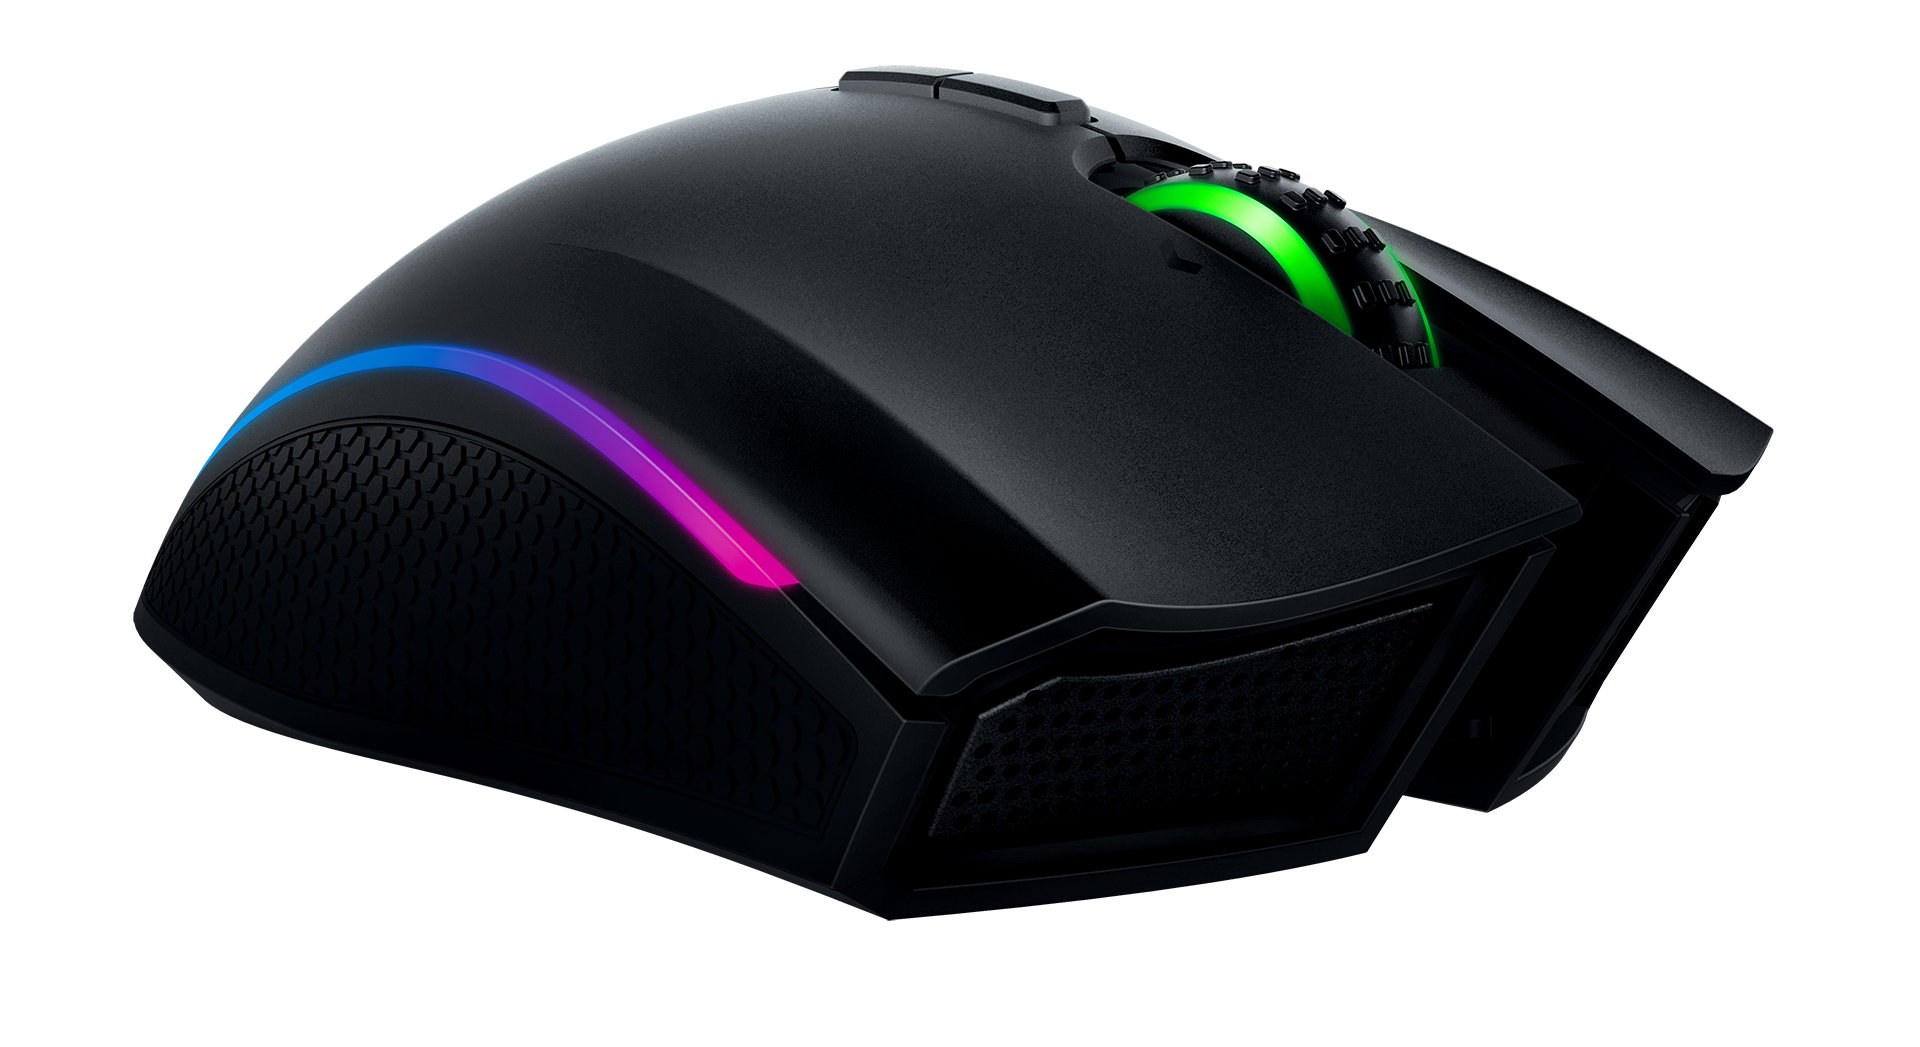 The World’s Most Advanced Gaming Mouse (Trailer)